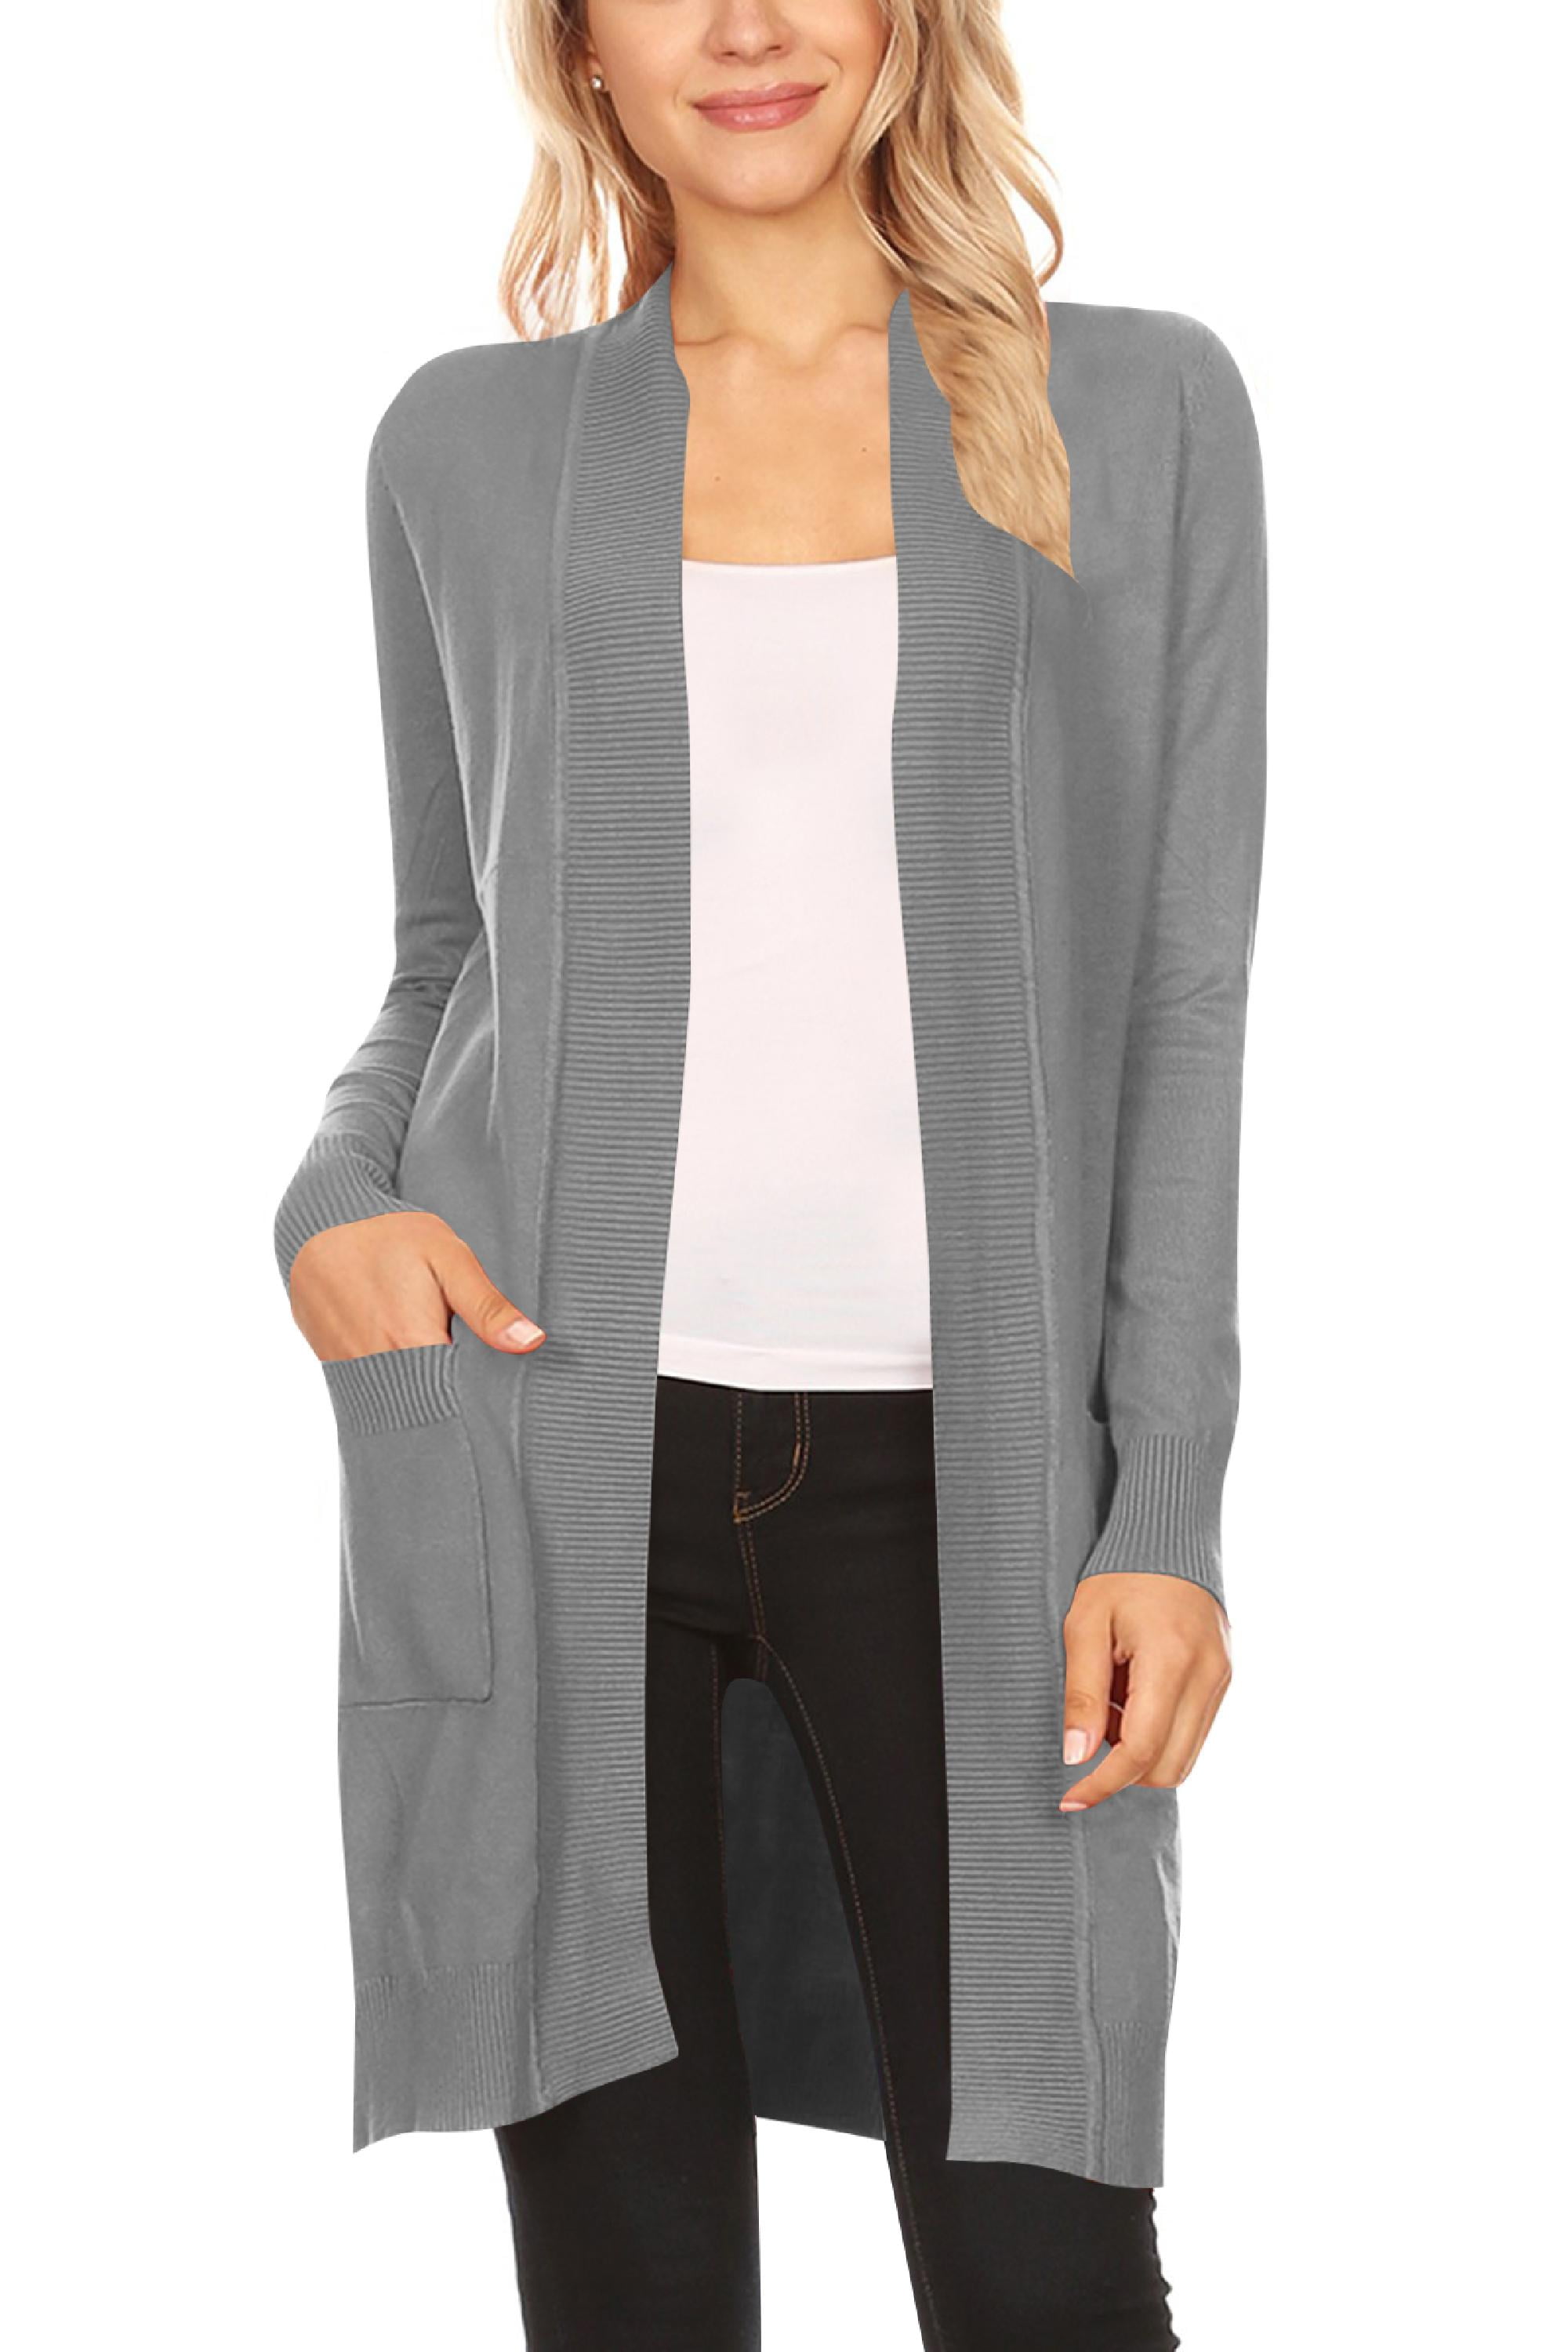 Womens Plus Size Long Sleeve Open Front Cardiagn Casual Lightweight Knit Cardigan with Pocket 